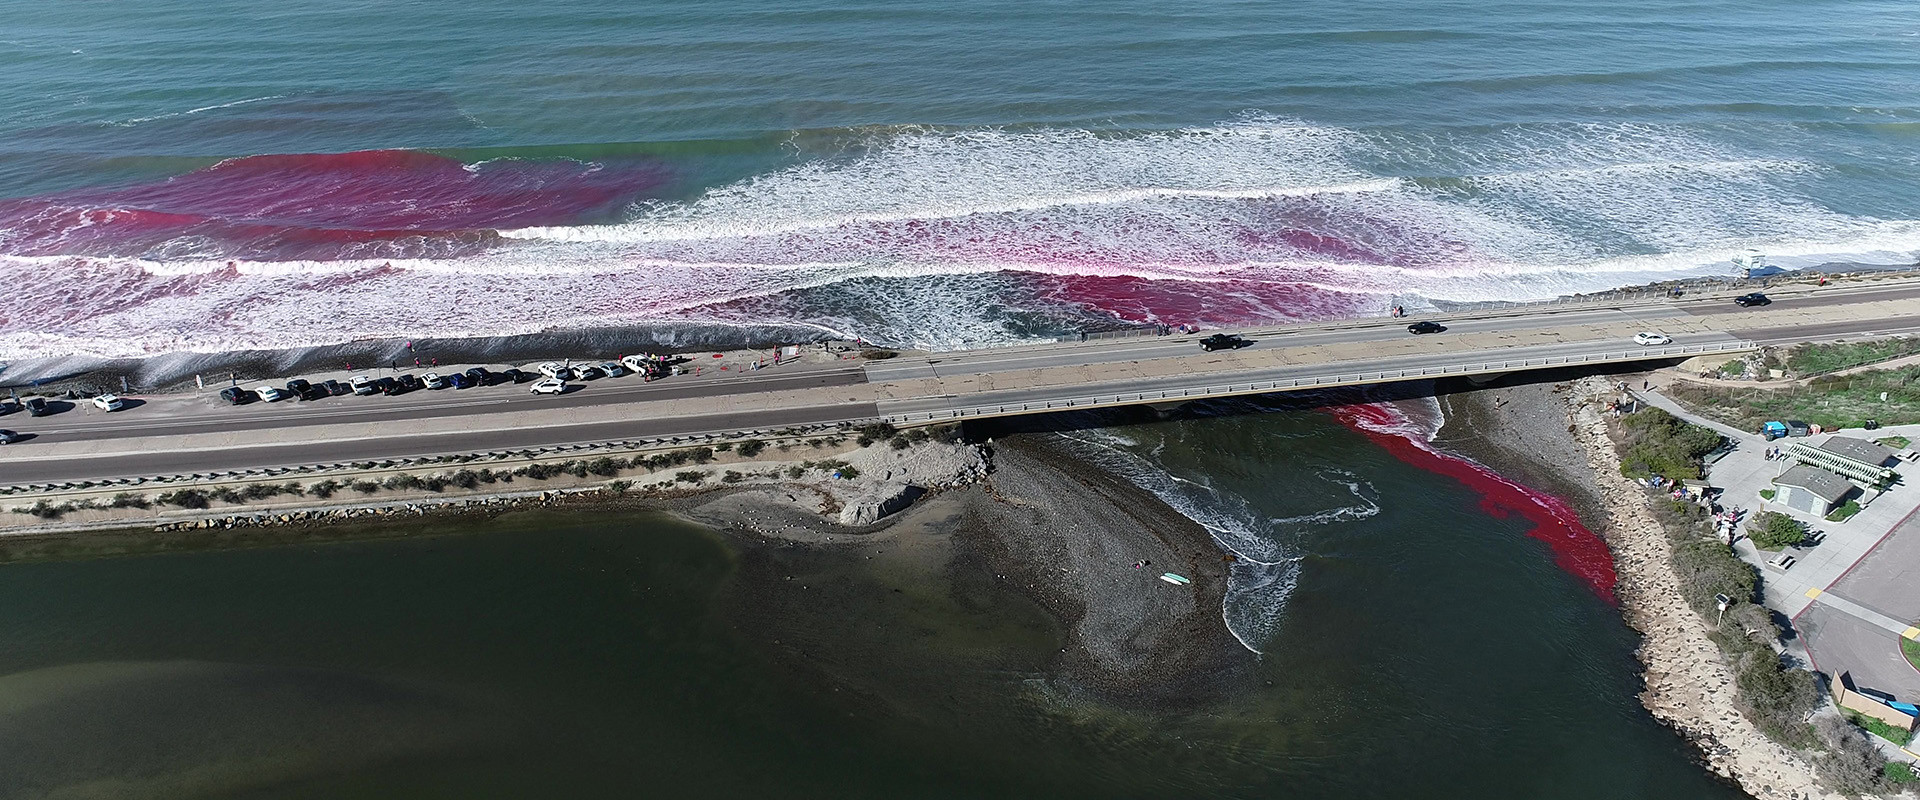 The first pink dye release at Los Peñasquitos Lagoon resulted in visible pink waves and seawater at Torrey Pines State Beach. Photo: Alex Simpson